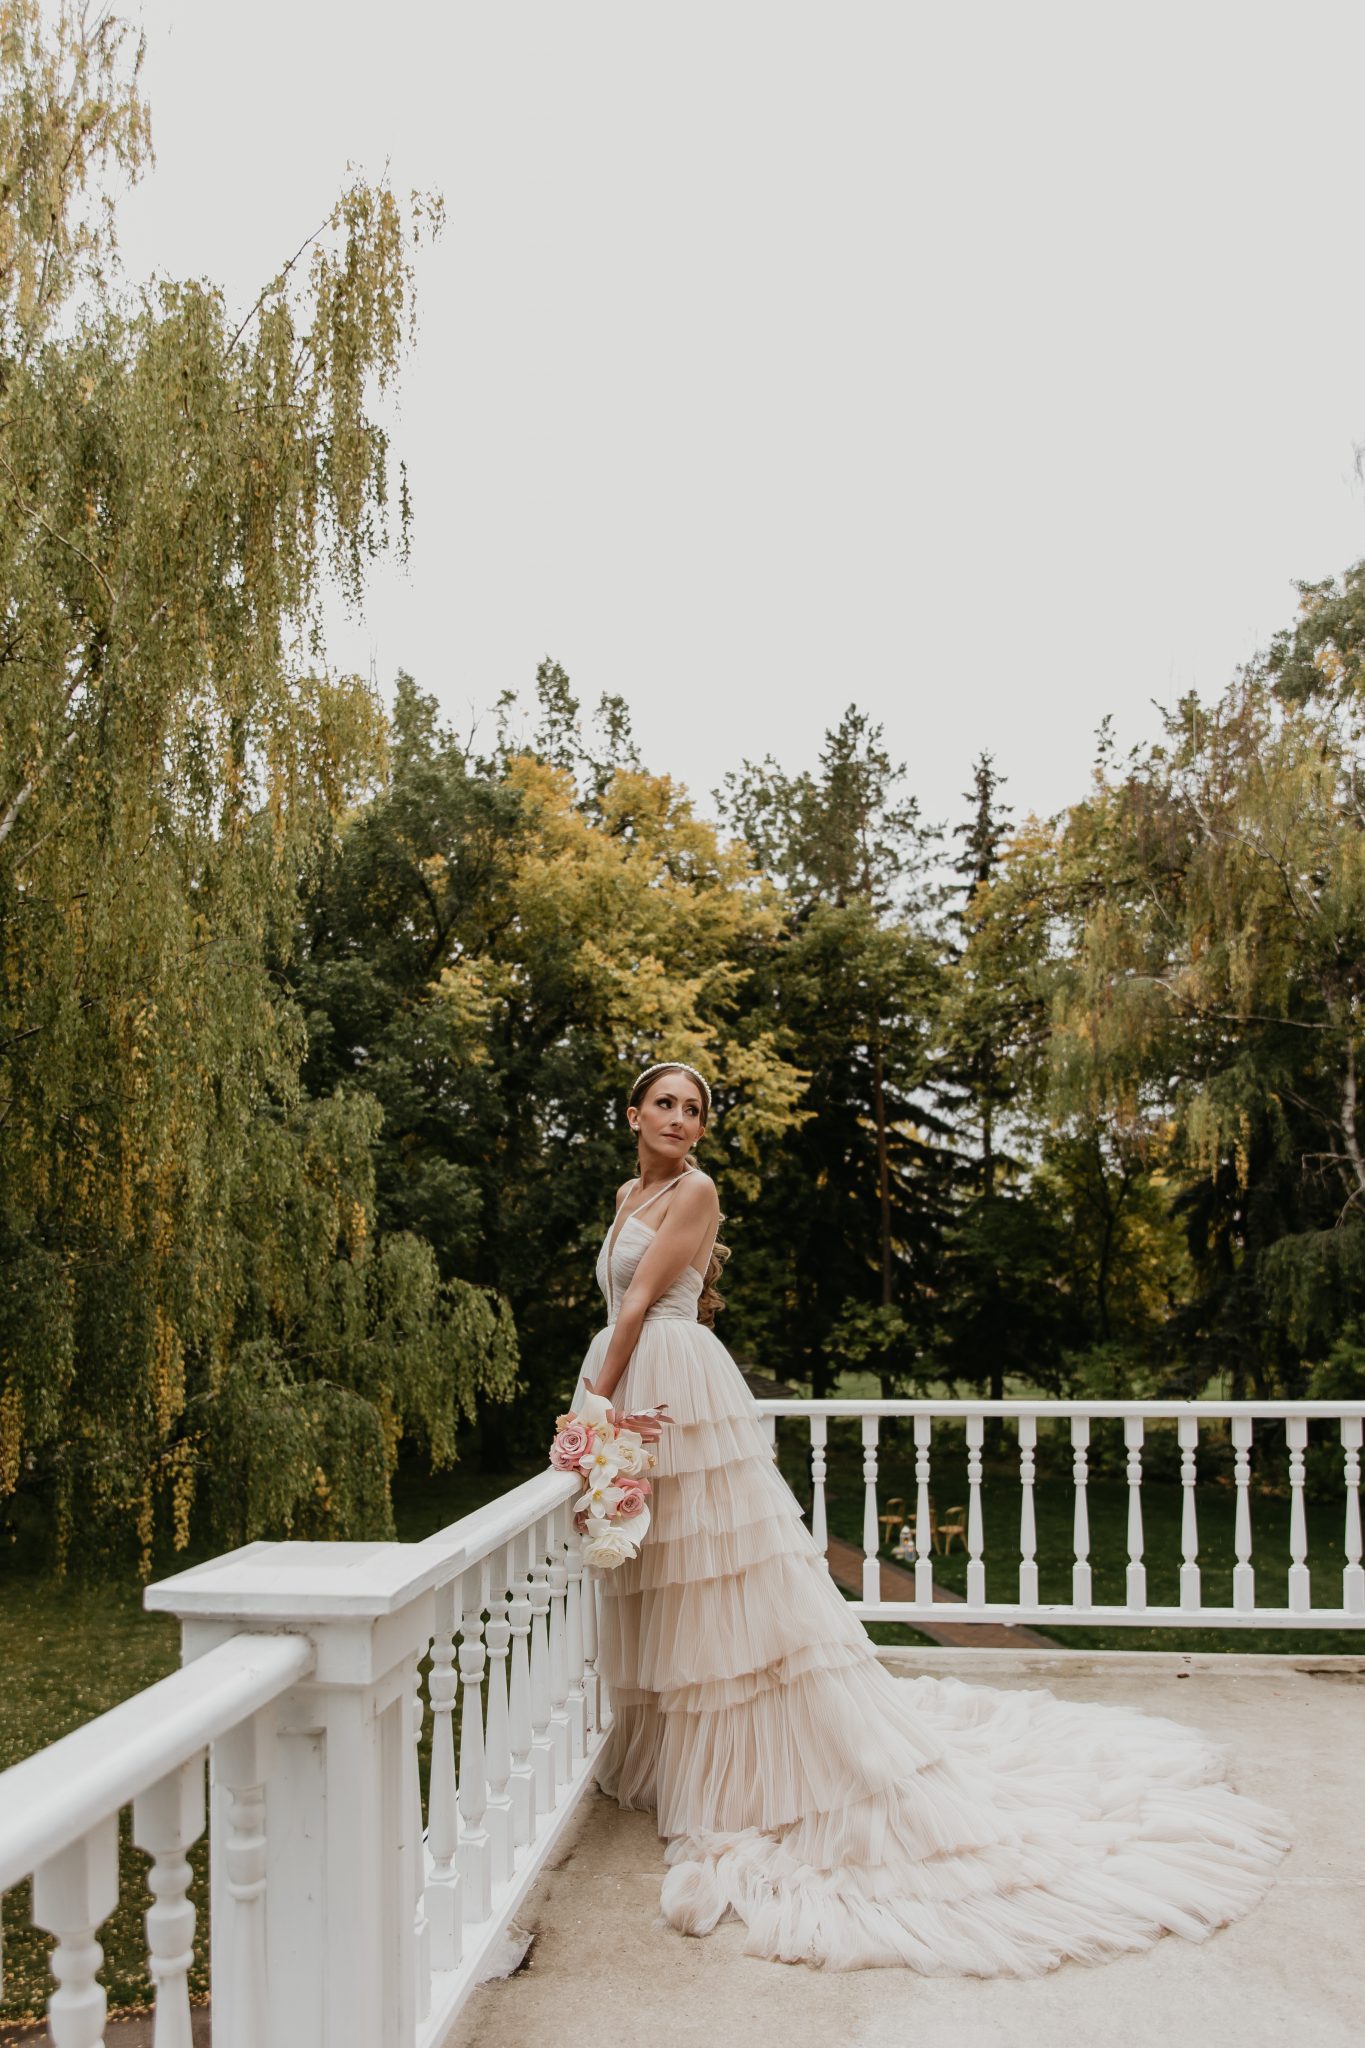 Modern Blush on Blush Wedding Inspiration with a Ruffled Gown to Die For, wedding dress, bridal bouquet, ponytail 